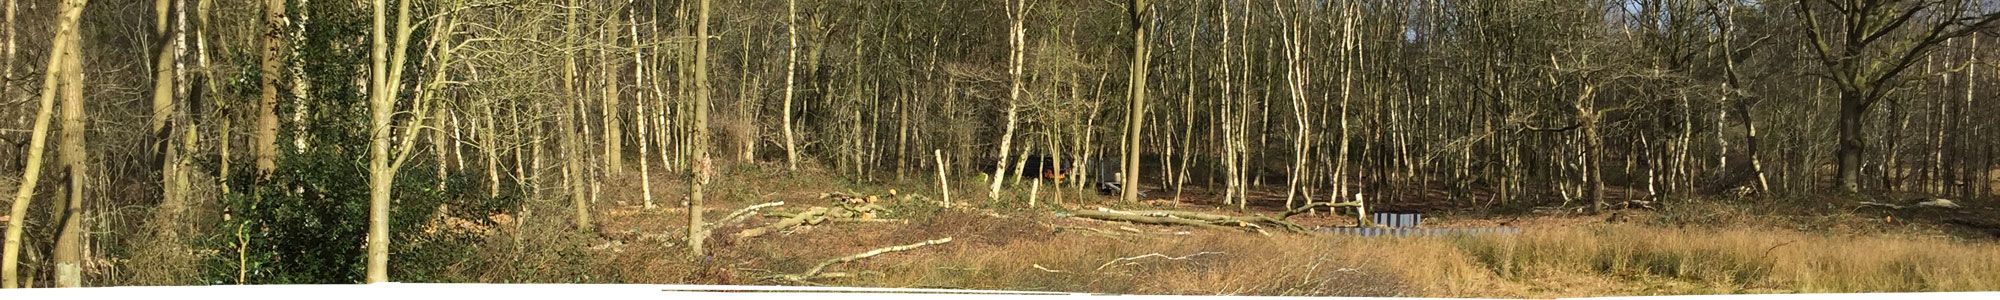 Trees cut down in forest near Wrexham